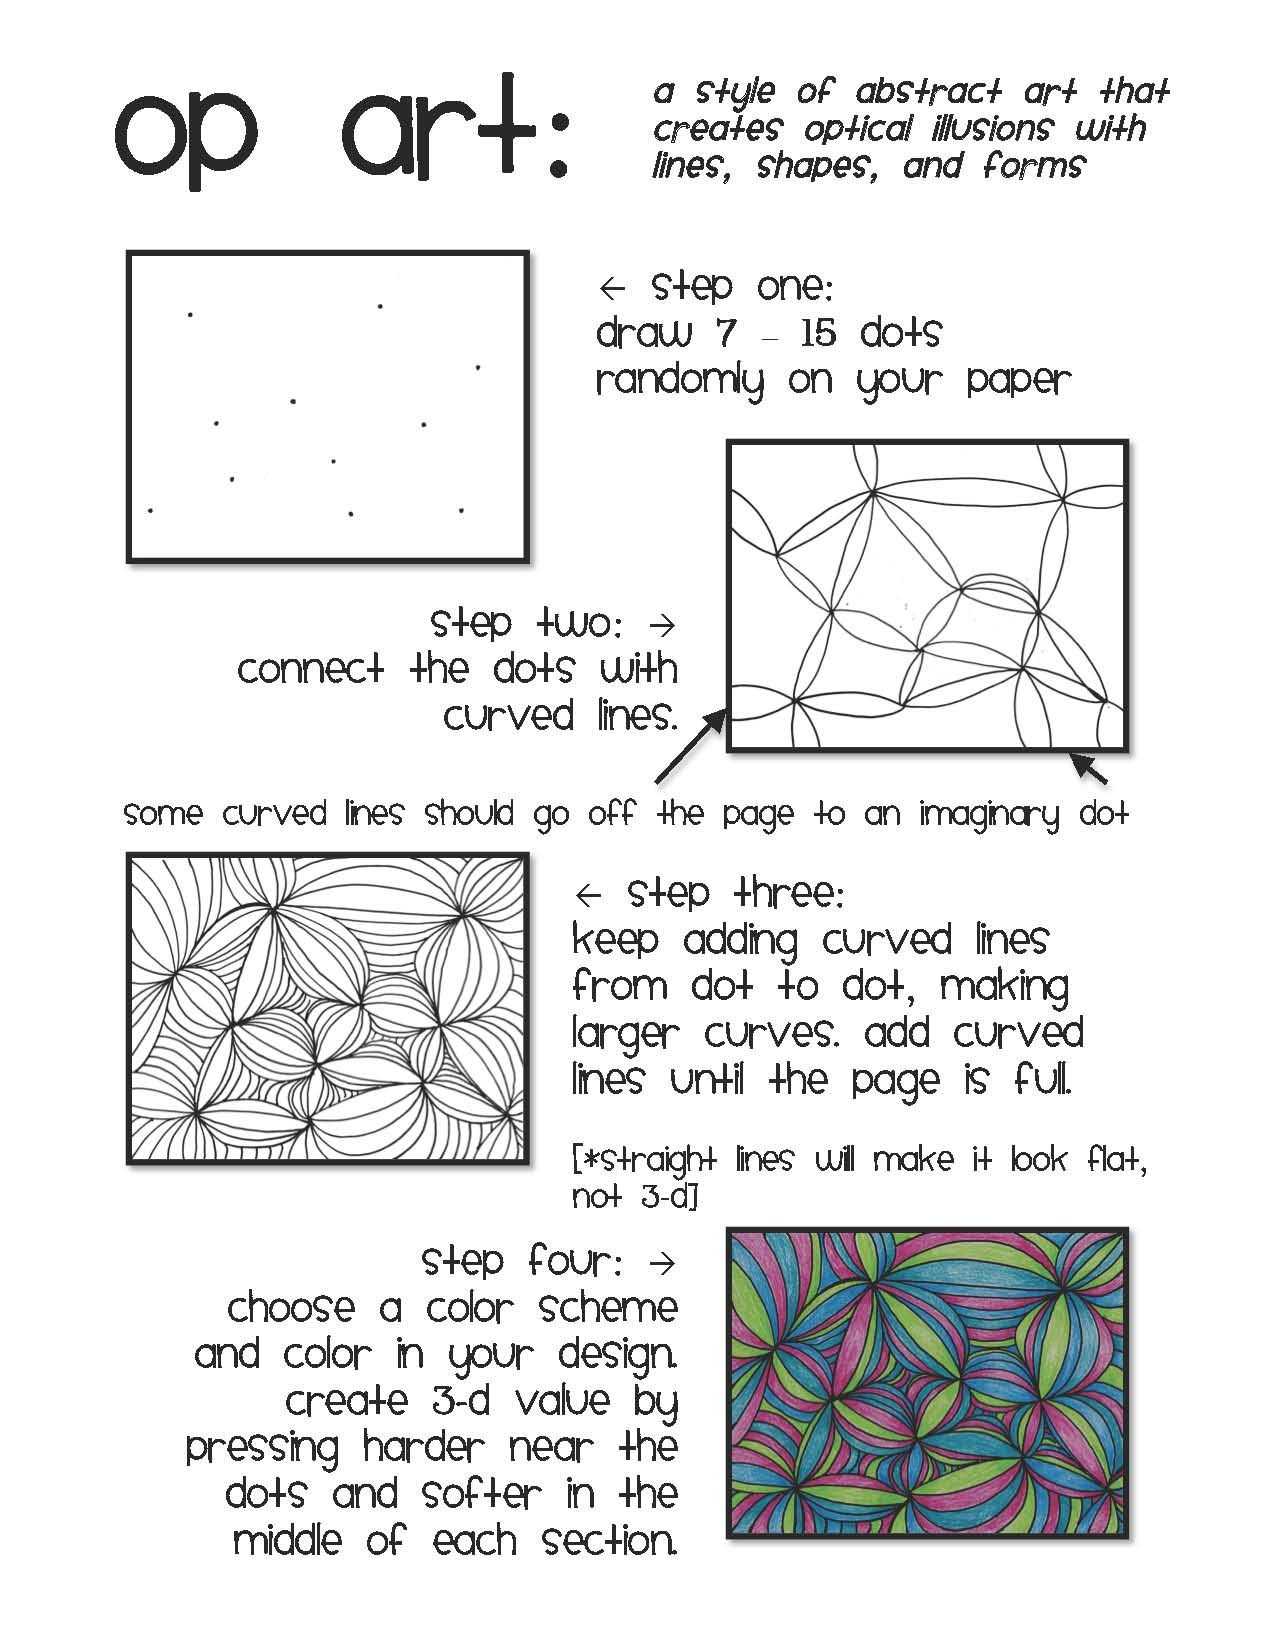 Translations Of Shapes Worksheet Answers Also Media Cache Ak0 Pinimg originals 30 80 26